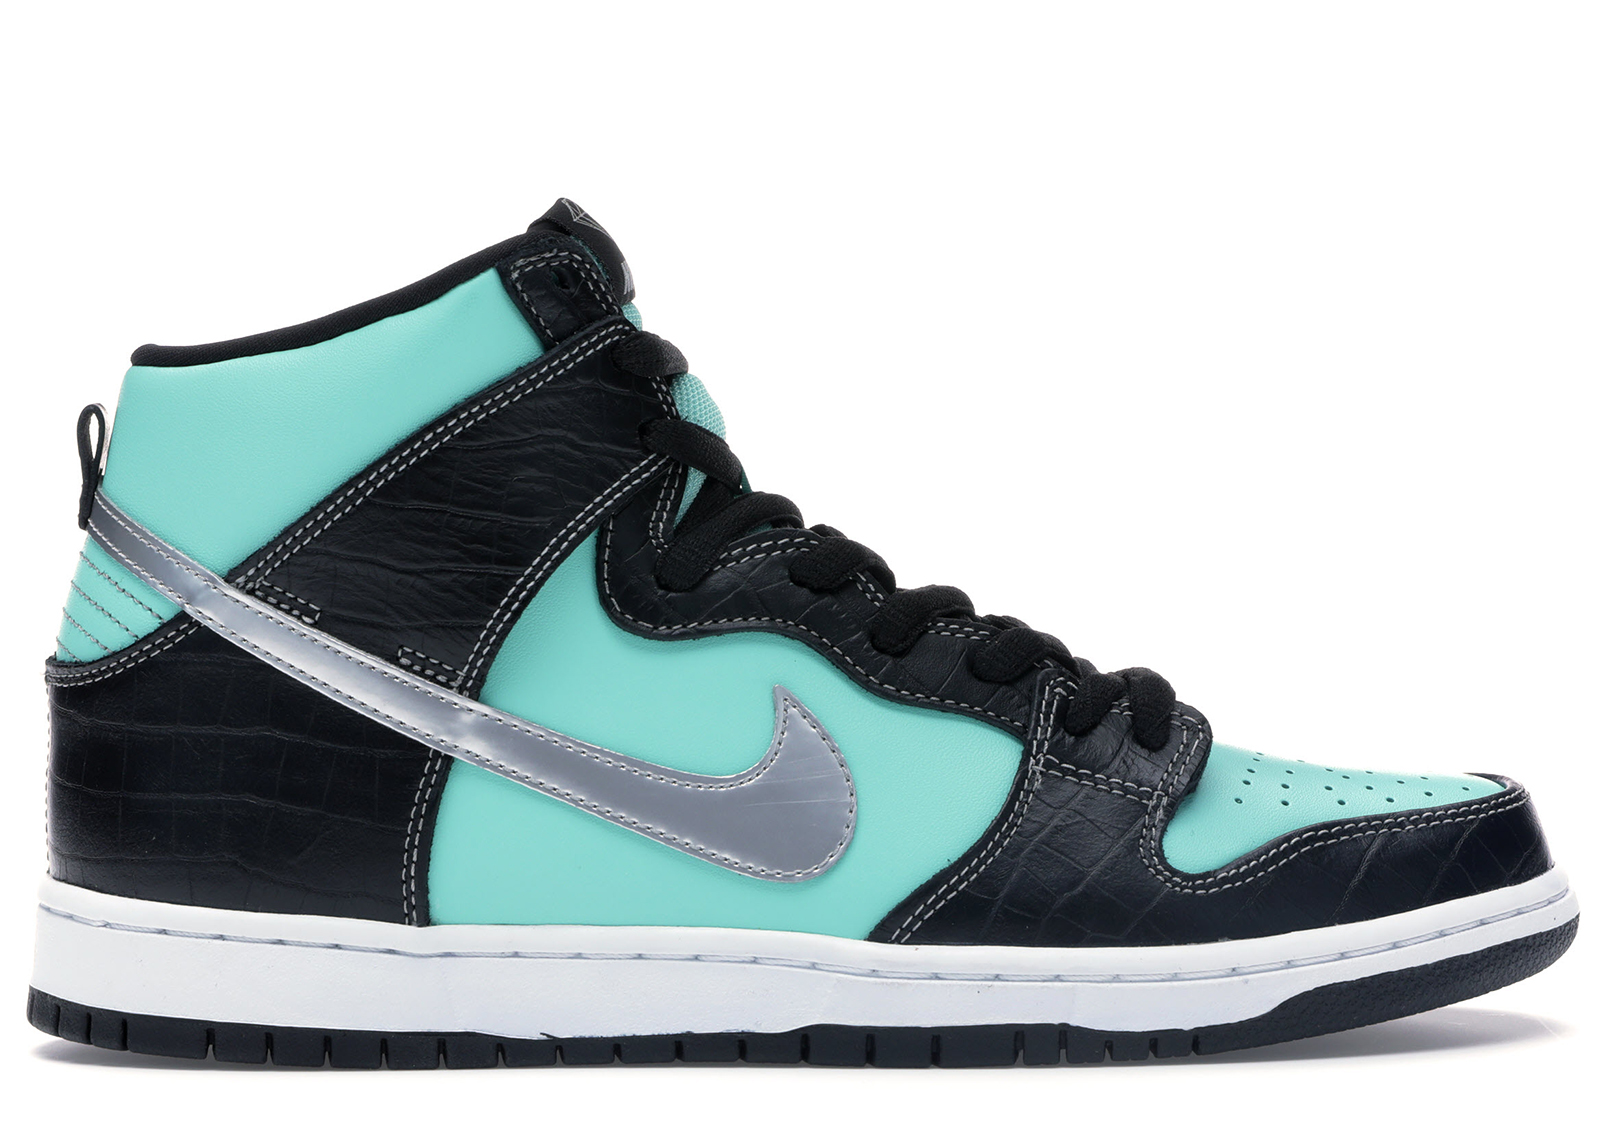 Buy Nike SB SB Dunk High Shoes & New Sneakers - StockX